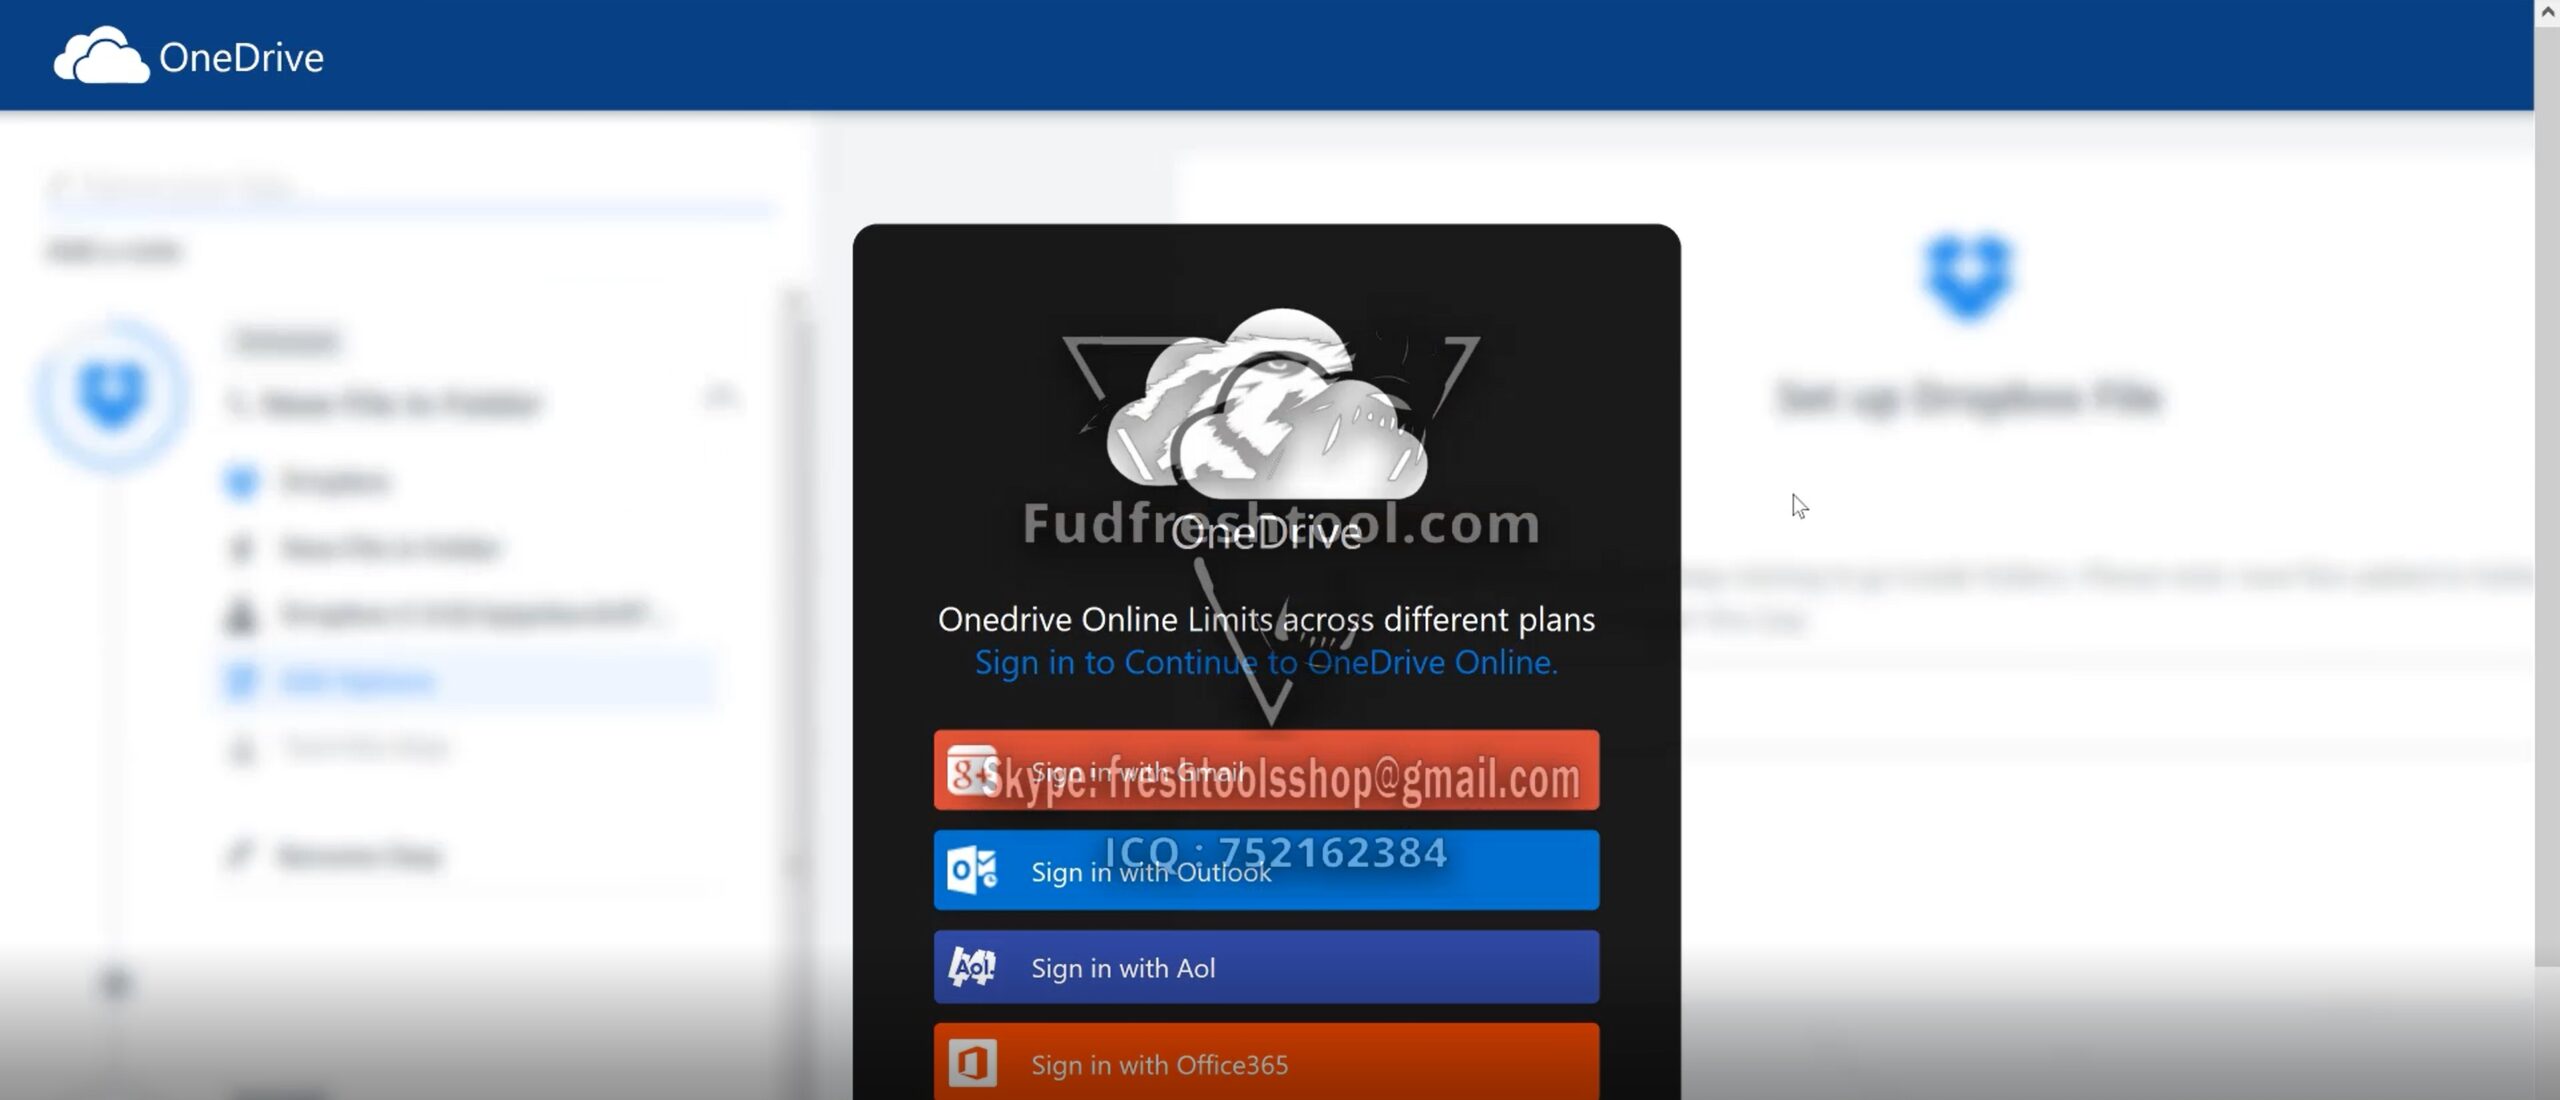 OneDrive Scam Page New